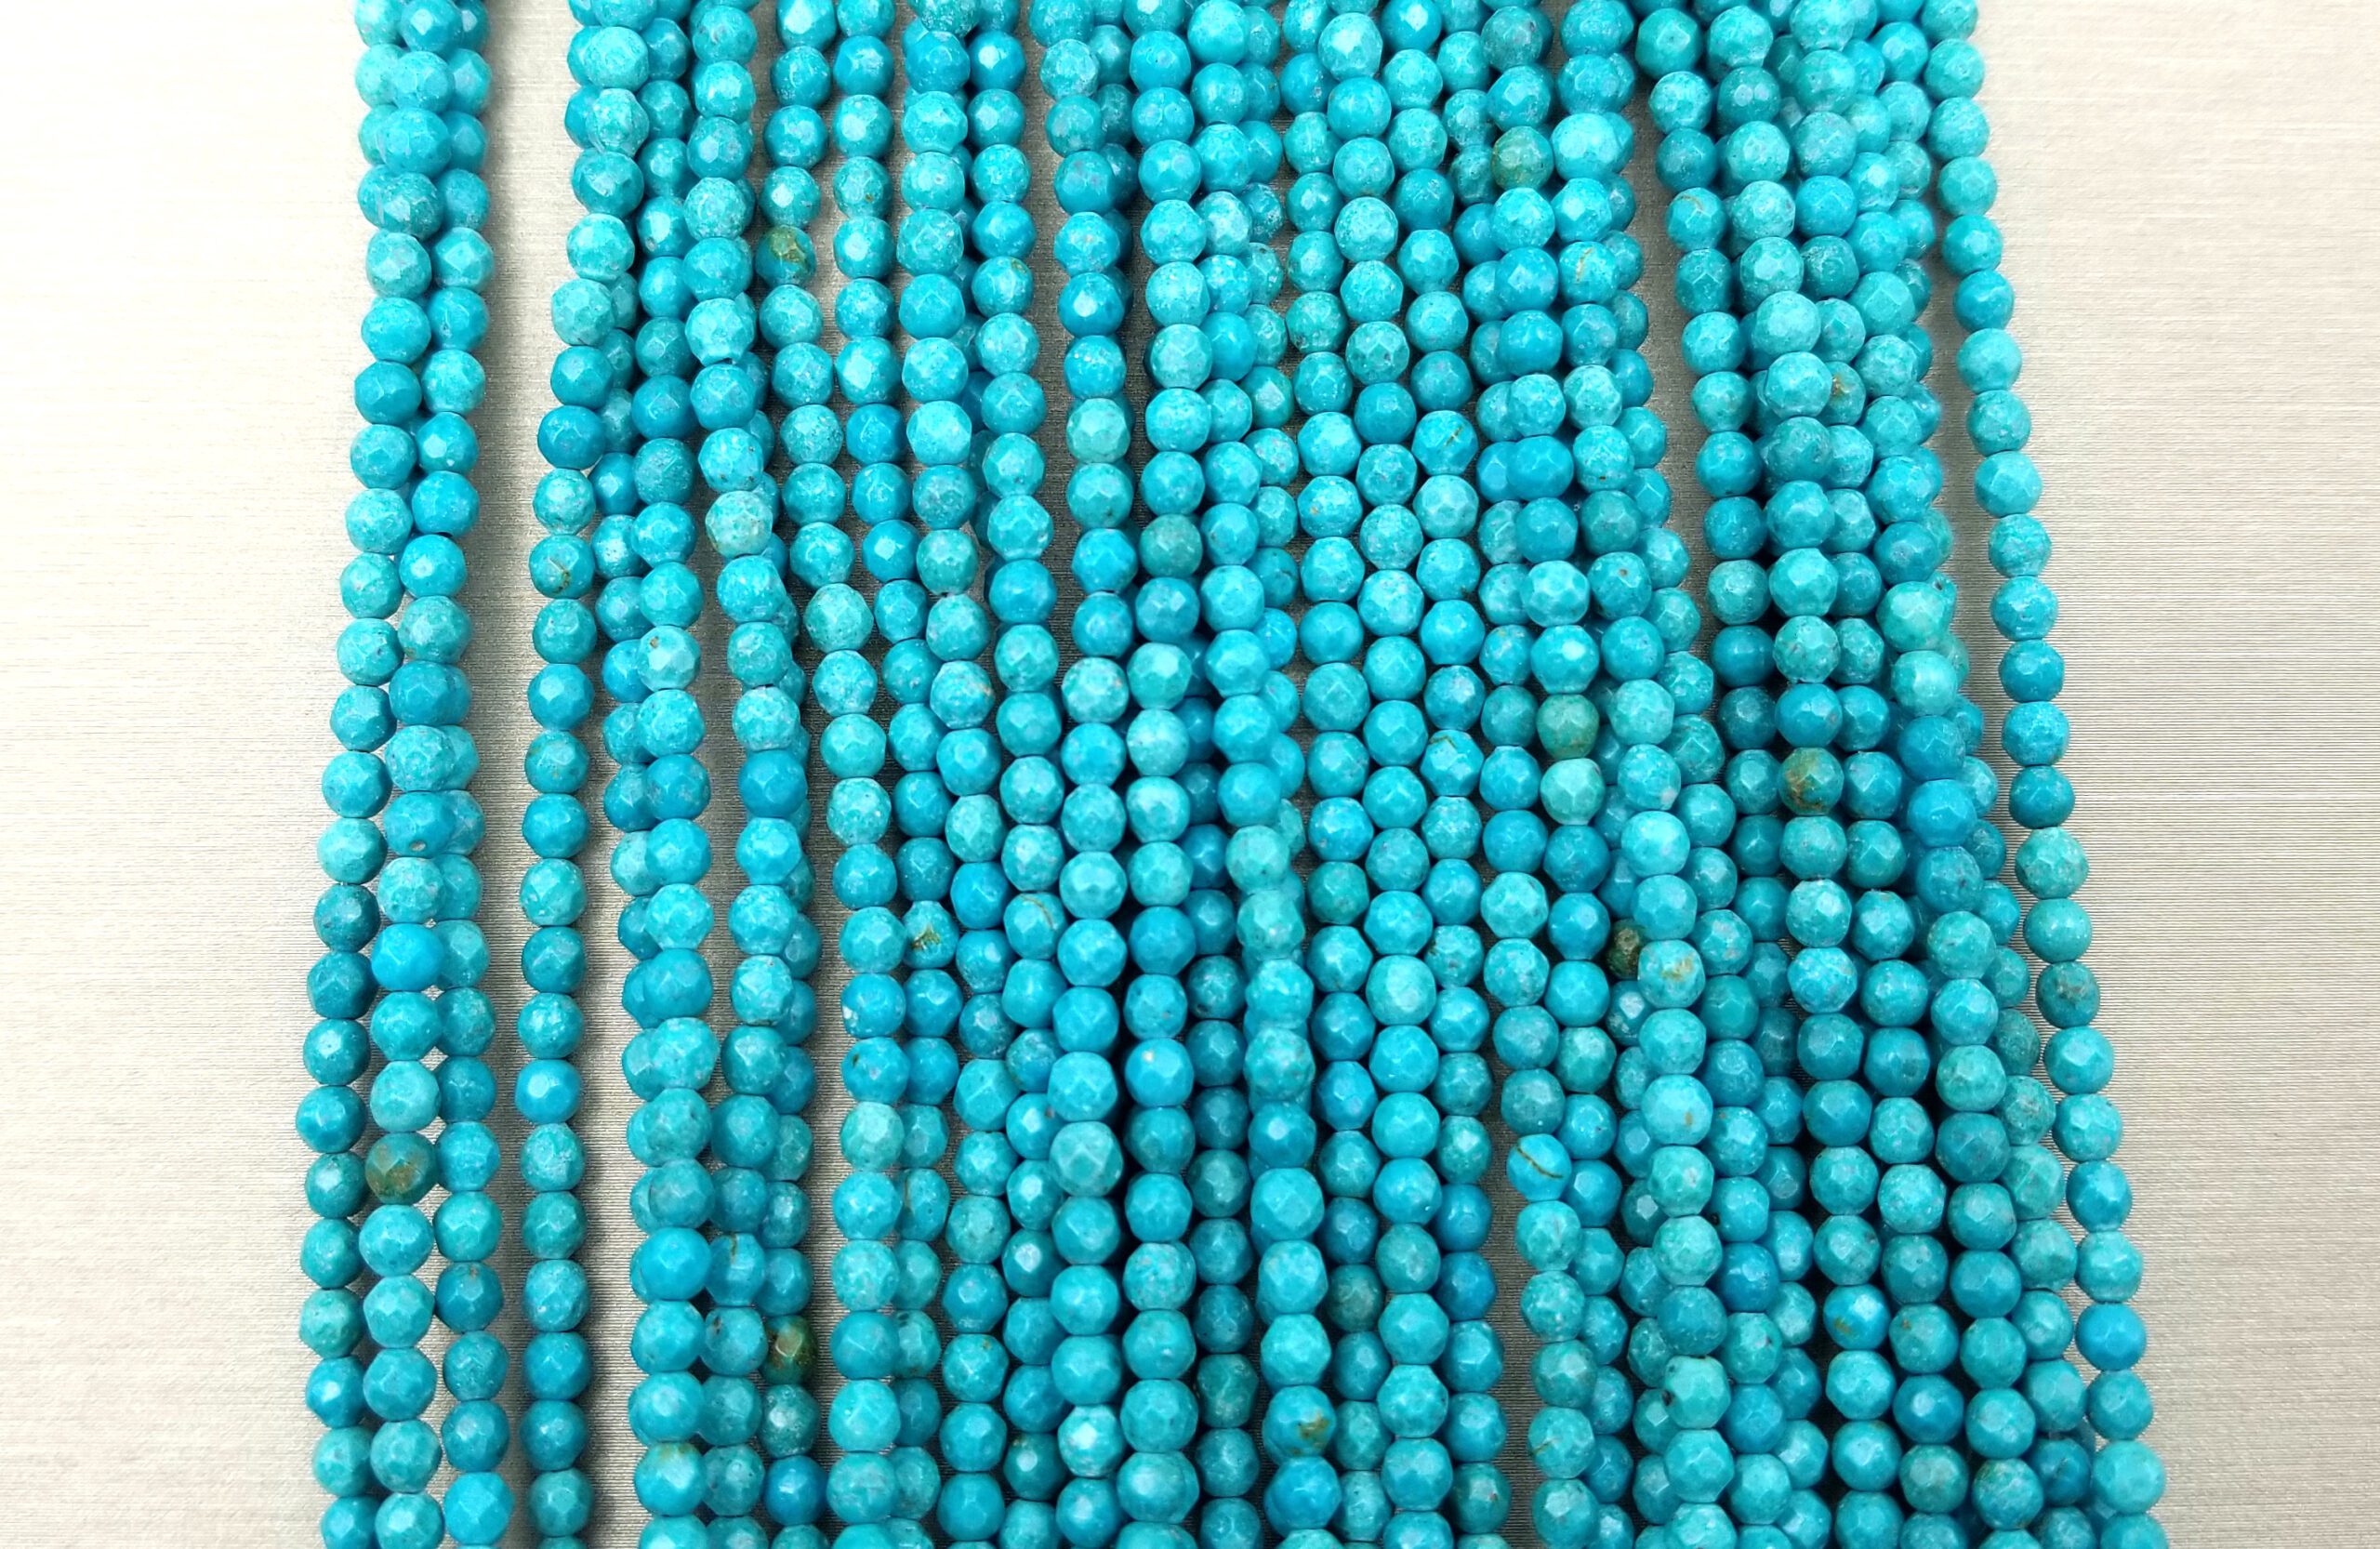 Hematite Beads For Jewelry Making, Cross Round Heart Tube Clover Square  Rondelle Hematite Gemstone Beads, Gold Silver Blue Green Bead ORG186